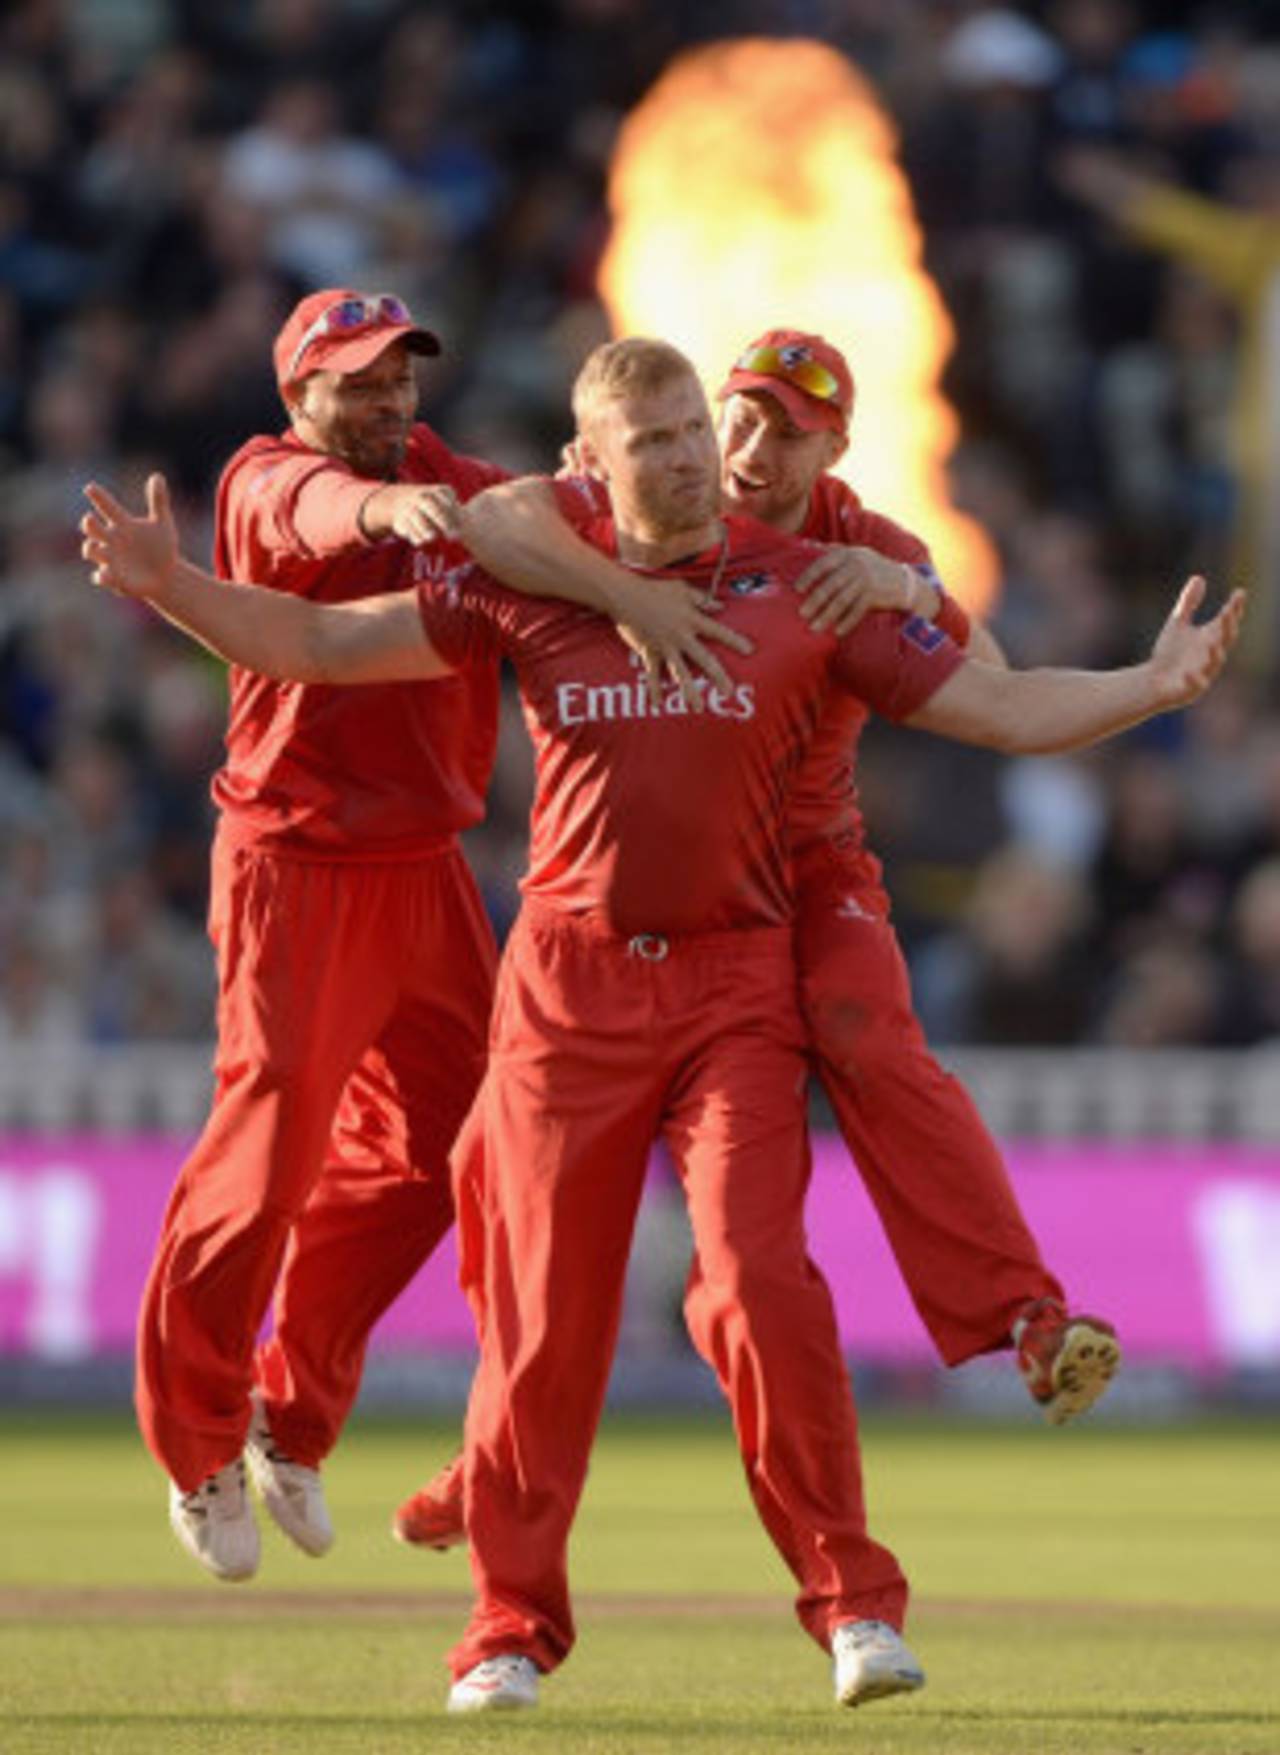 Remember that pose? Andrew Flintoff celebrates his wicket on T20 Blast finals day at Edgbaston&nbsp;&nbsp;&bull;&nbsp;&nbsp;Getty Images